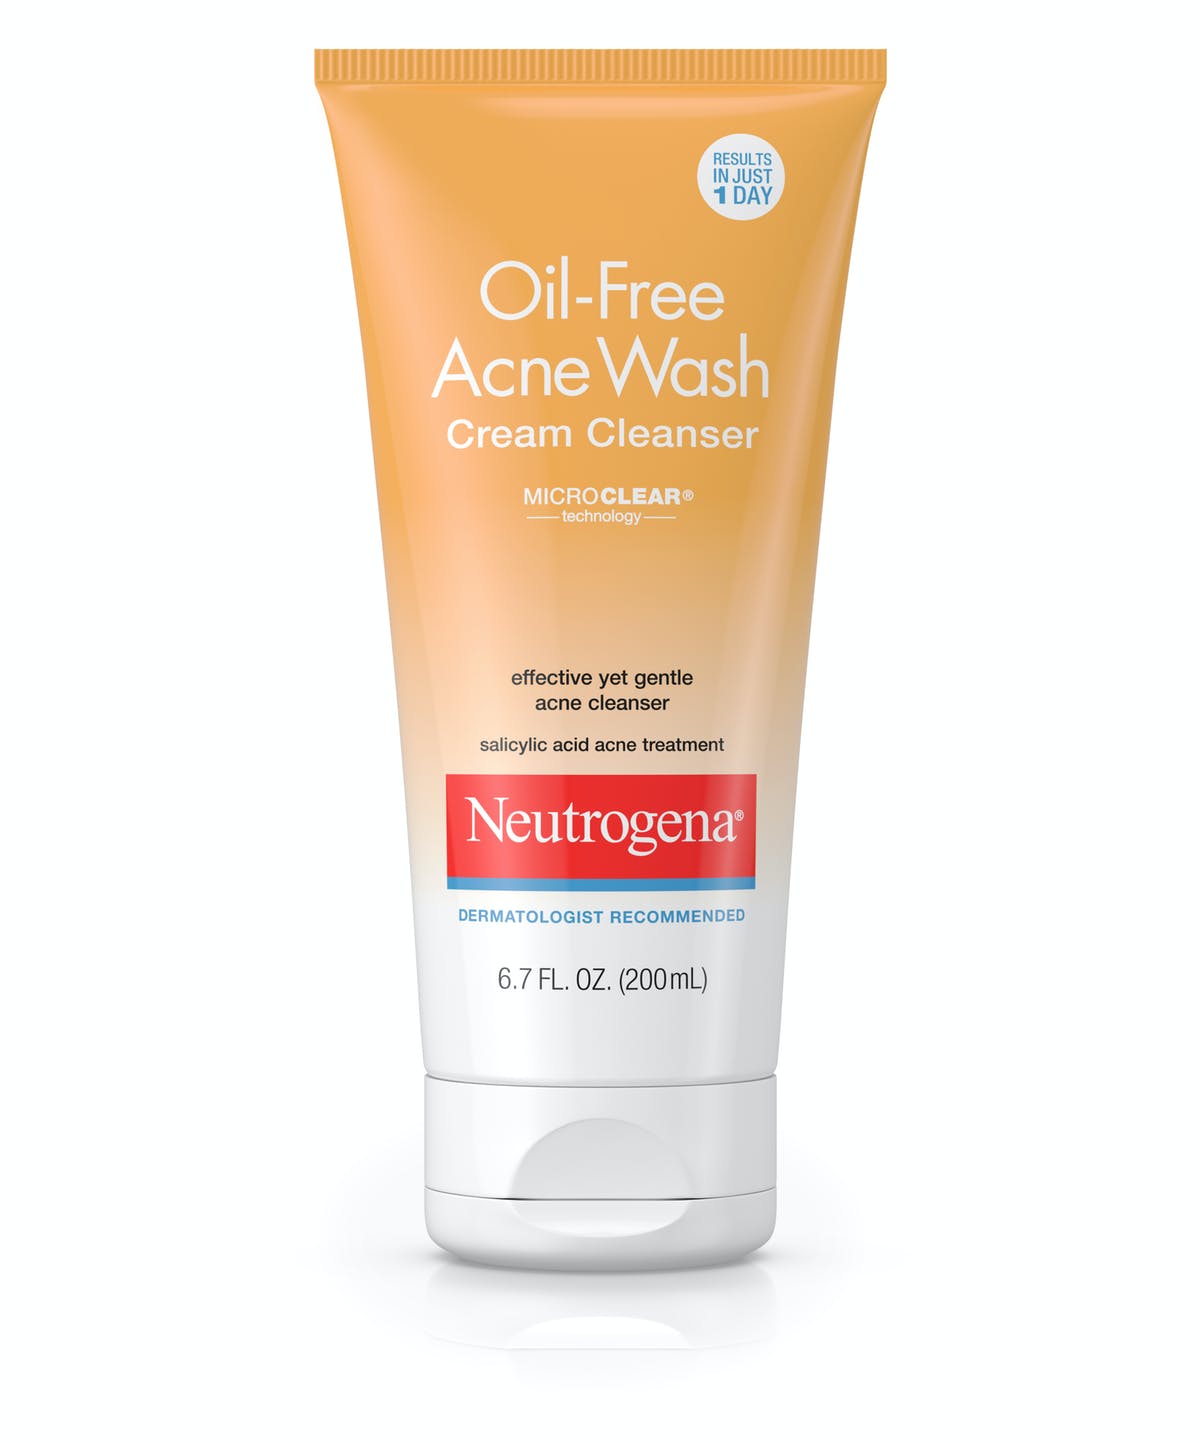 Neutrogena Oil-Free Acne Wash Cream Cleanser Best Face Wash For Acne in Pakistan